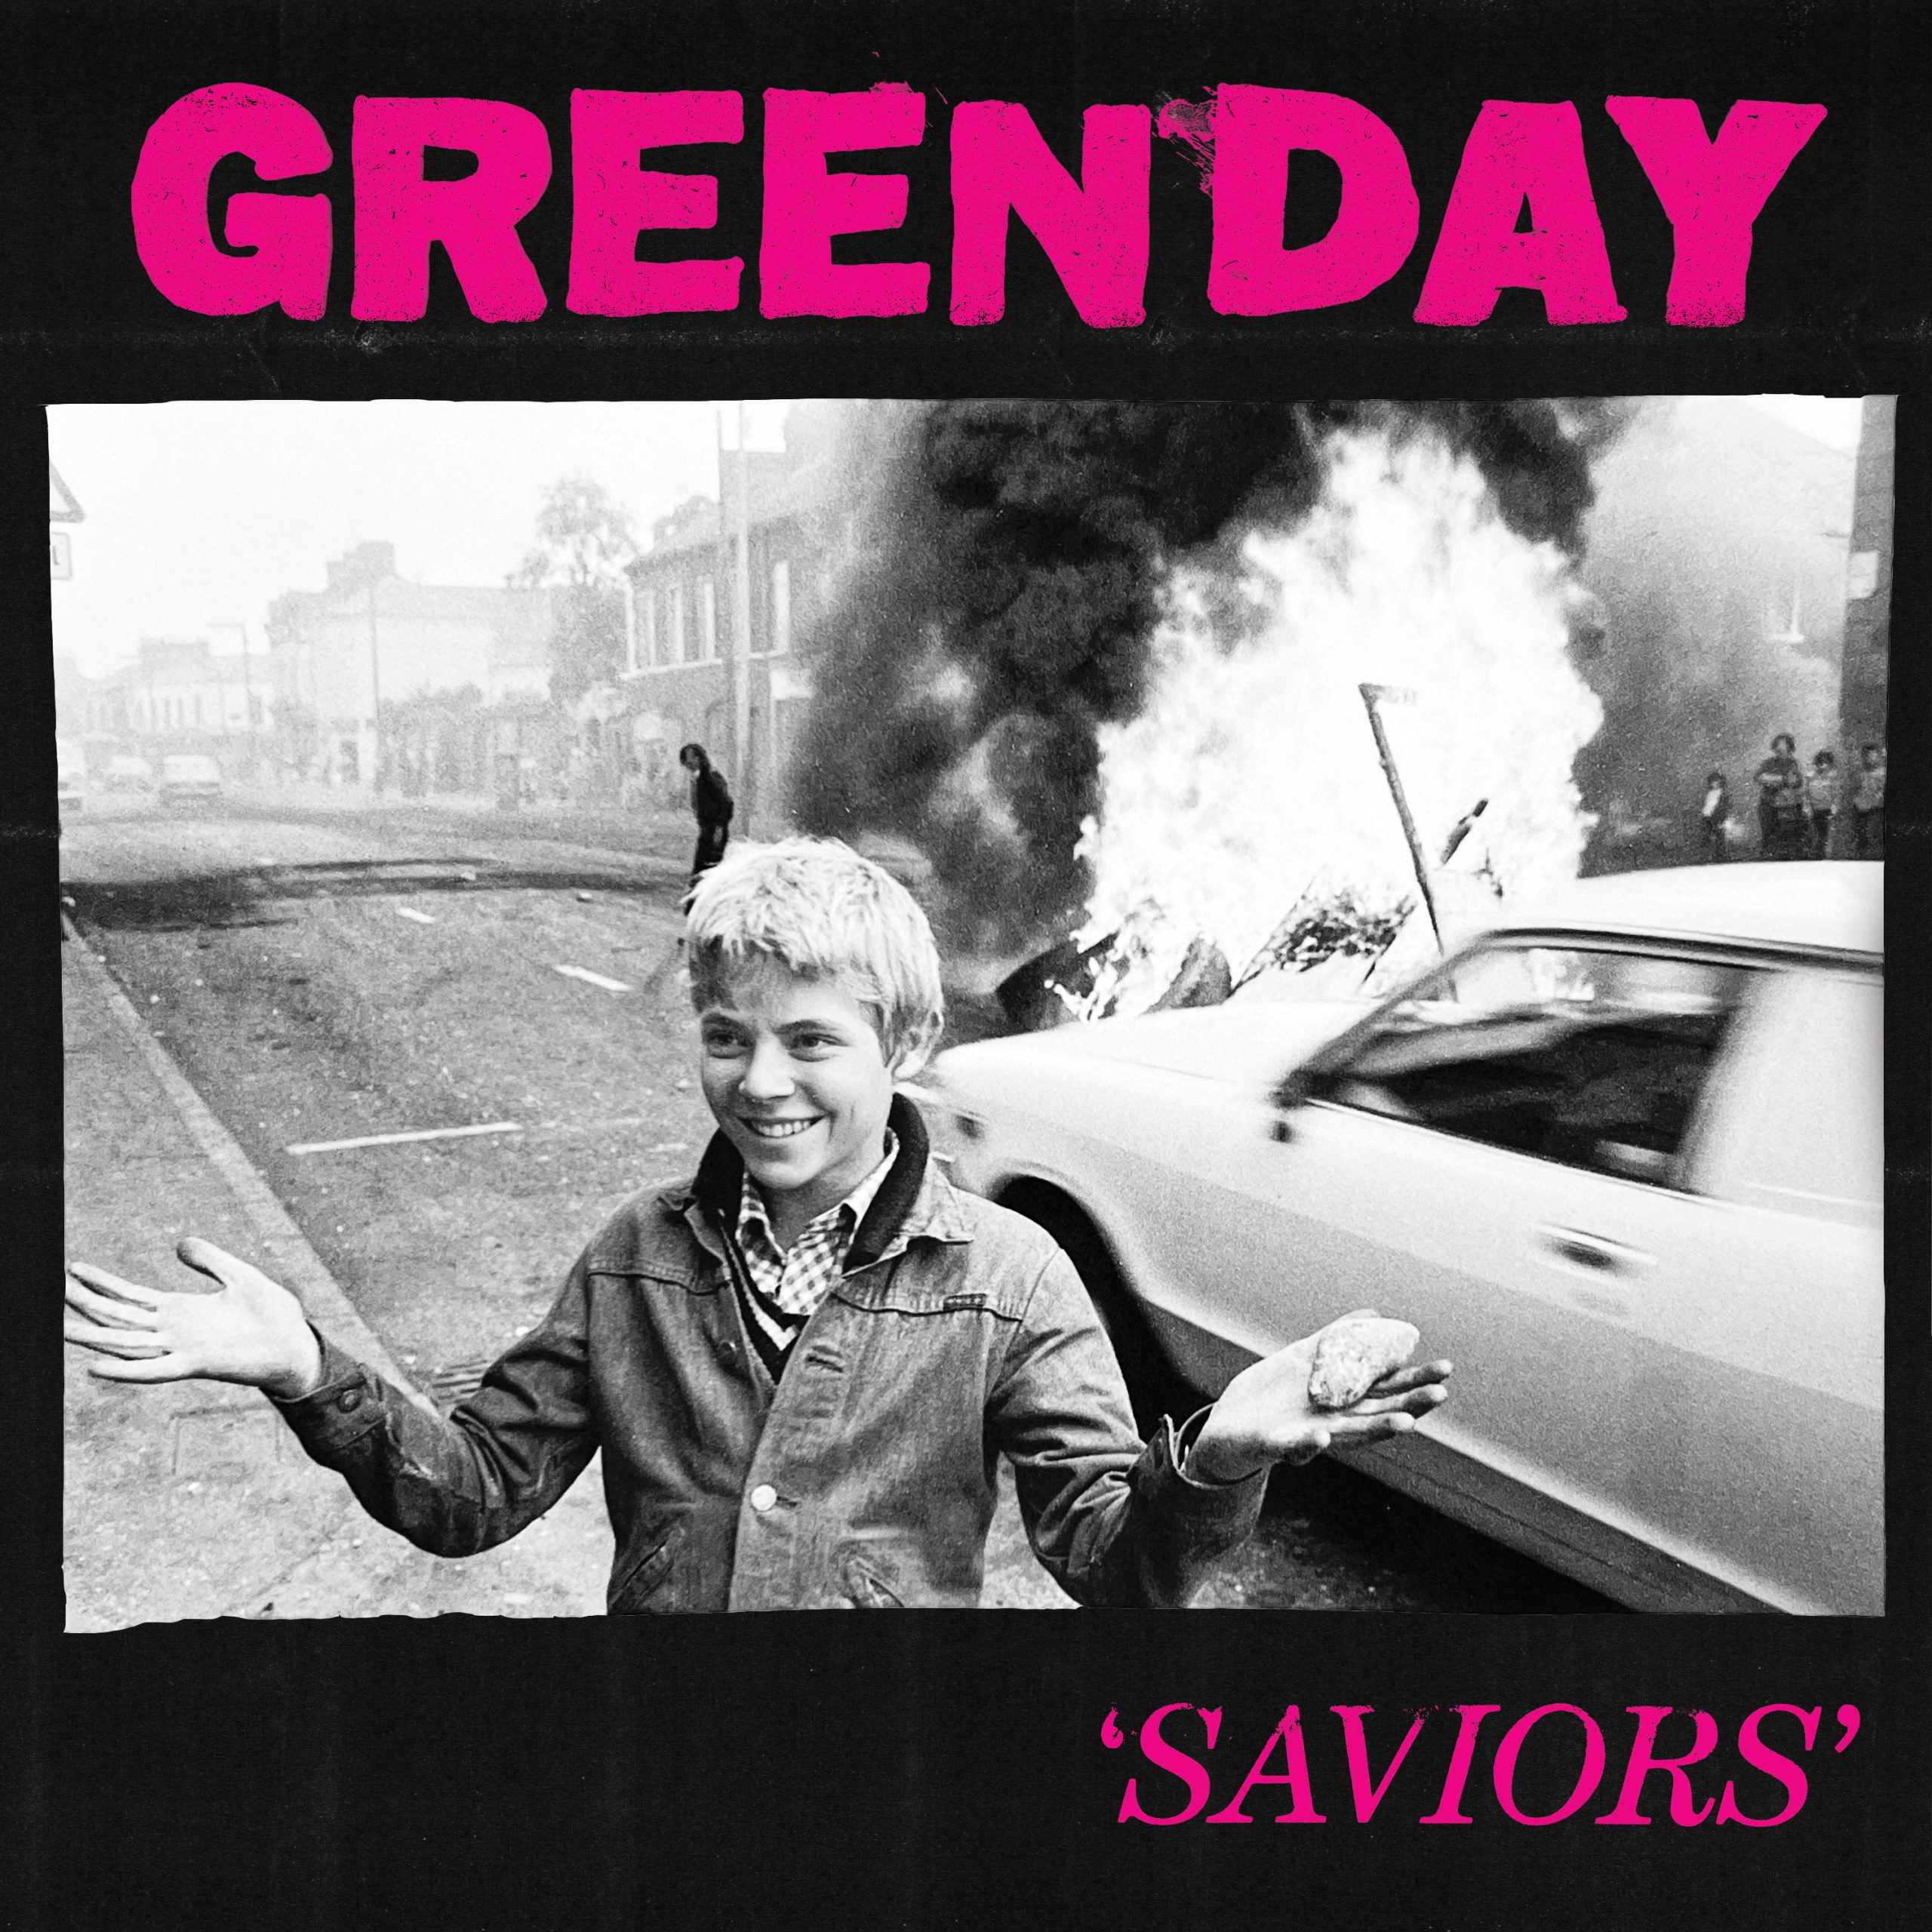 GREEN DAY RELEASE  “THE AMERICAN DREAM IS KILLING ME” + NEW ALBUM COMING!